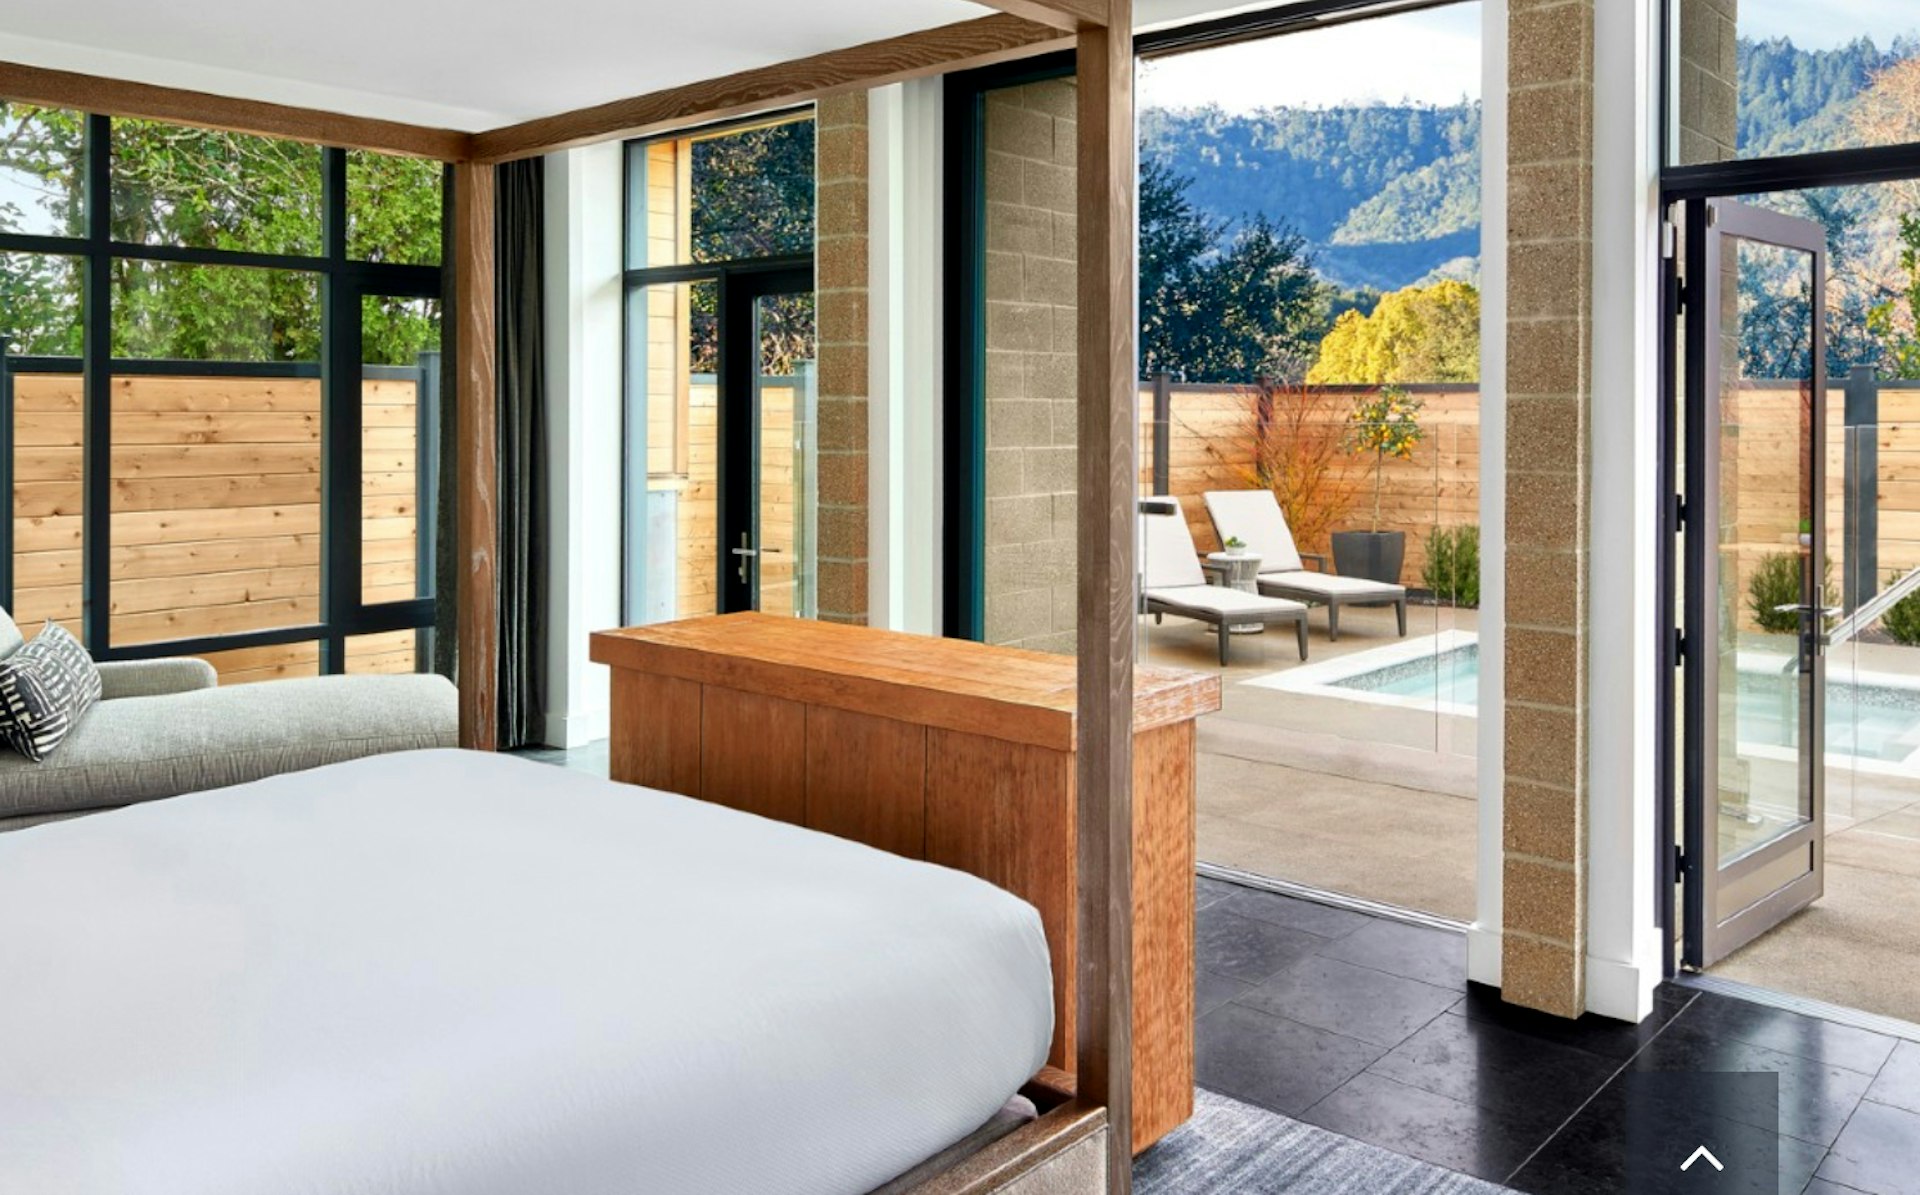 A large hotel room with a private plunge pool beyond floor-to-ceiling windows